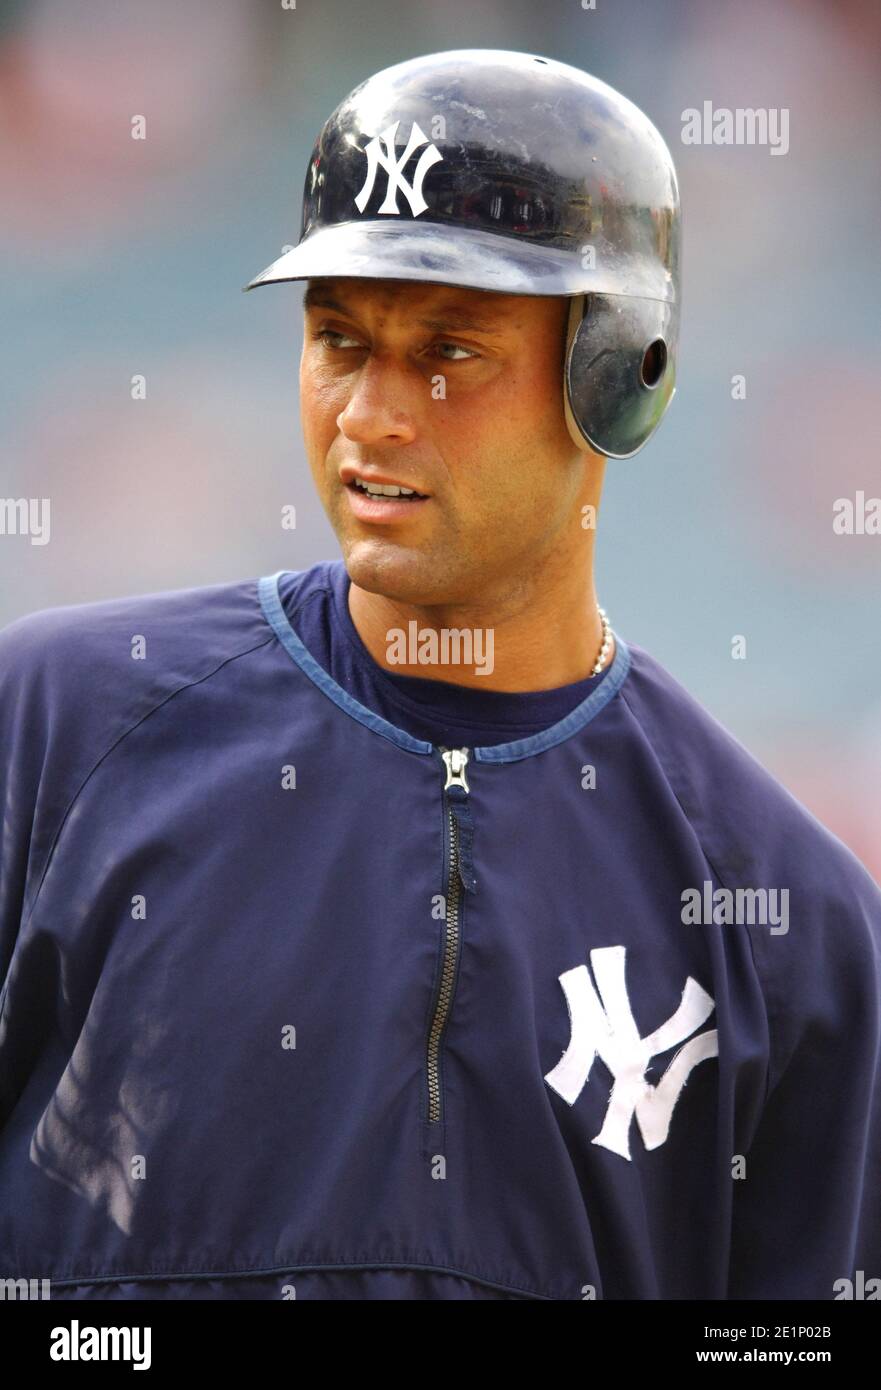 Derek Jeter of the New York Yankees during batting practice before game against the Los Angeles Angels of Anaheim at Angel Stadium in Anaheim, Calif. Stock Photo